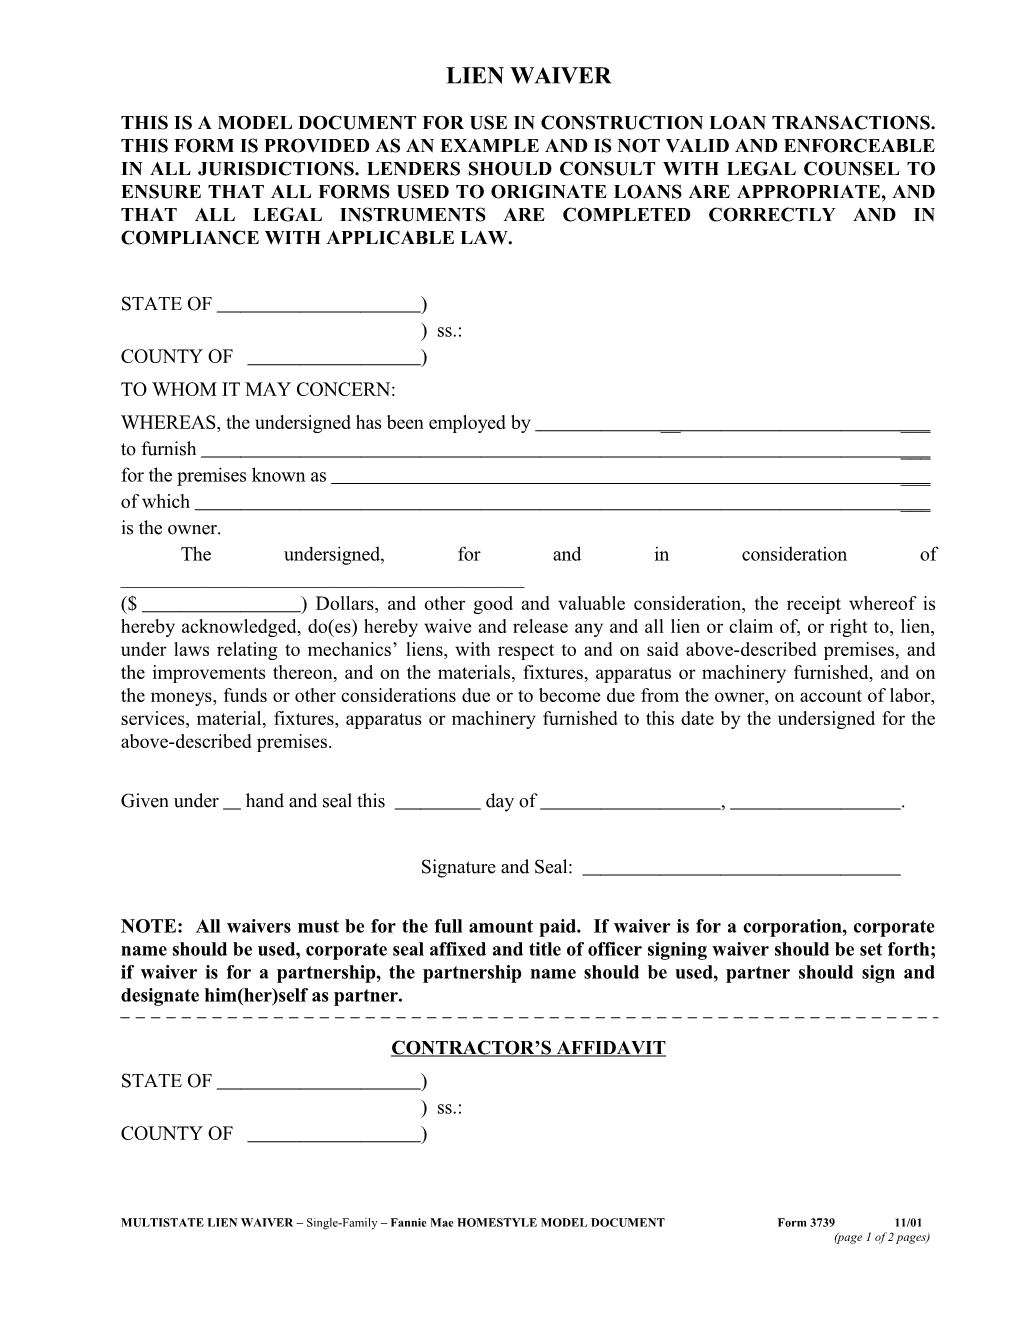 Multistate Lien Waiver (Form 3739): Word